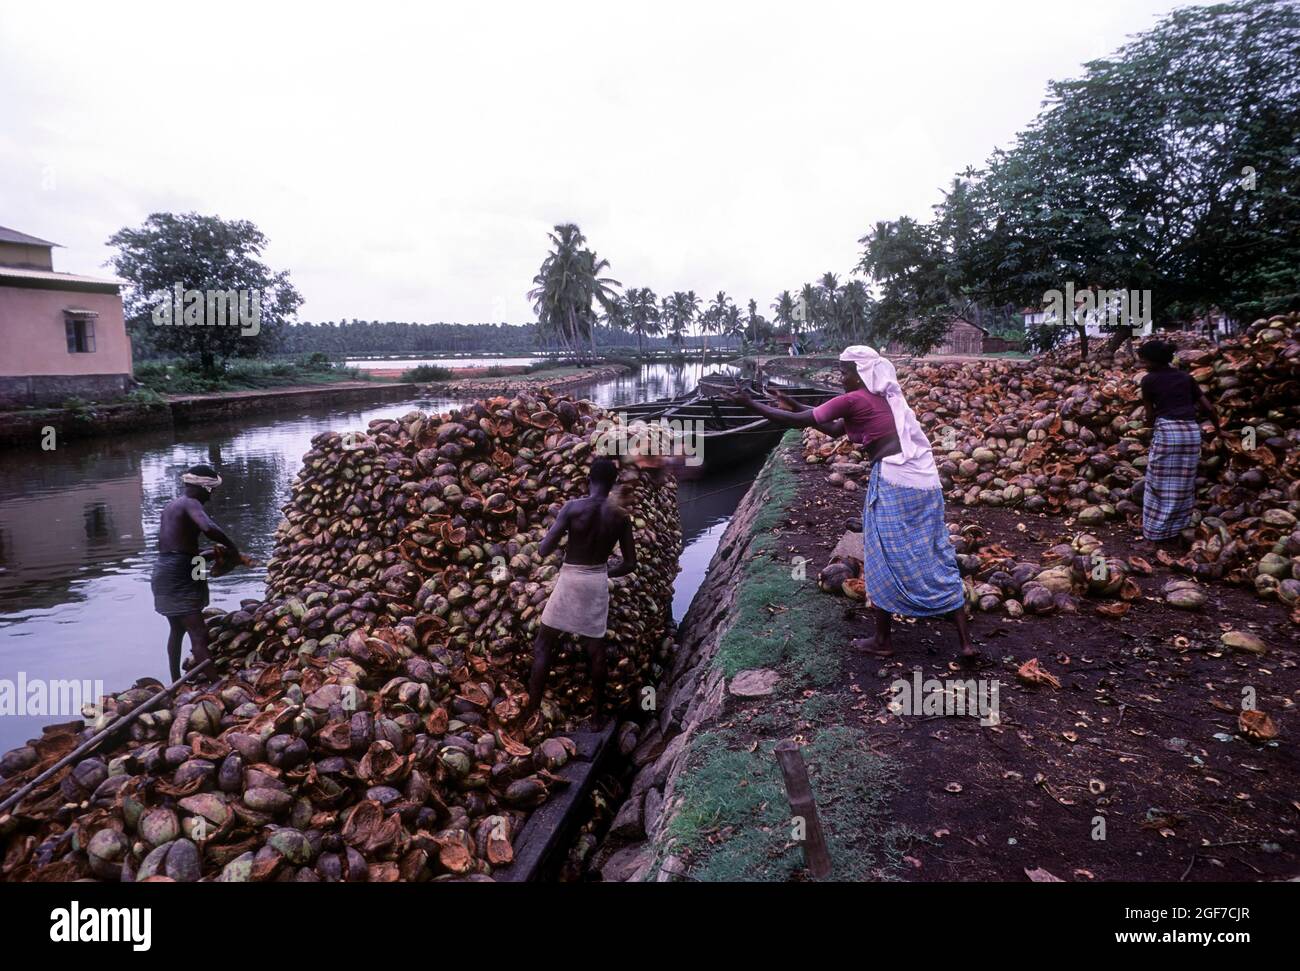 Coconut husk being loaded in the Boat, Kuttanad, Kerala, India Stock Photo